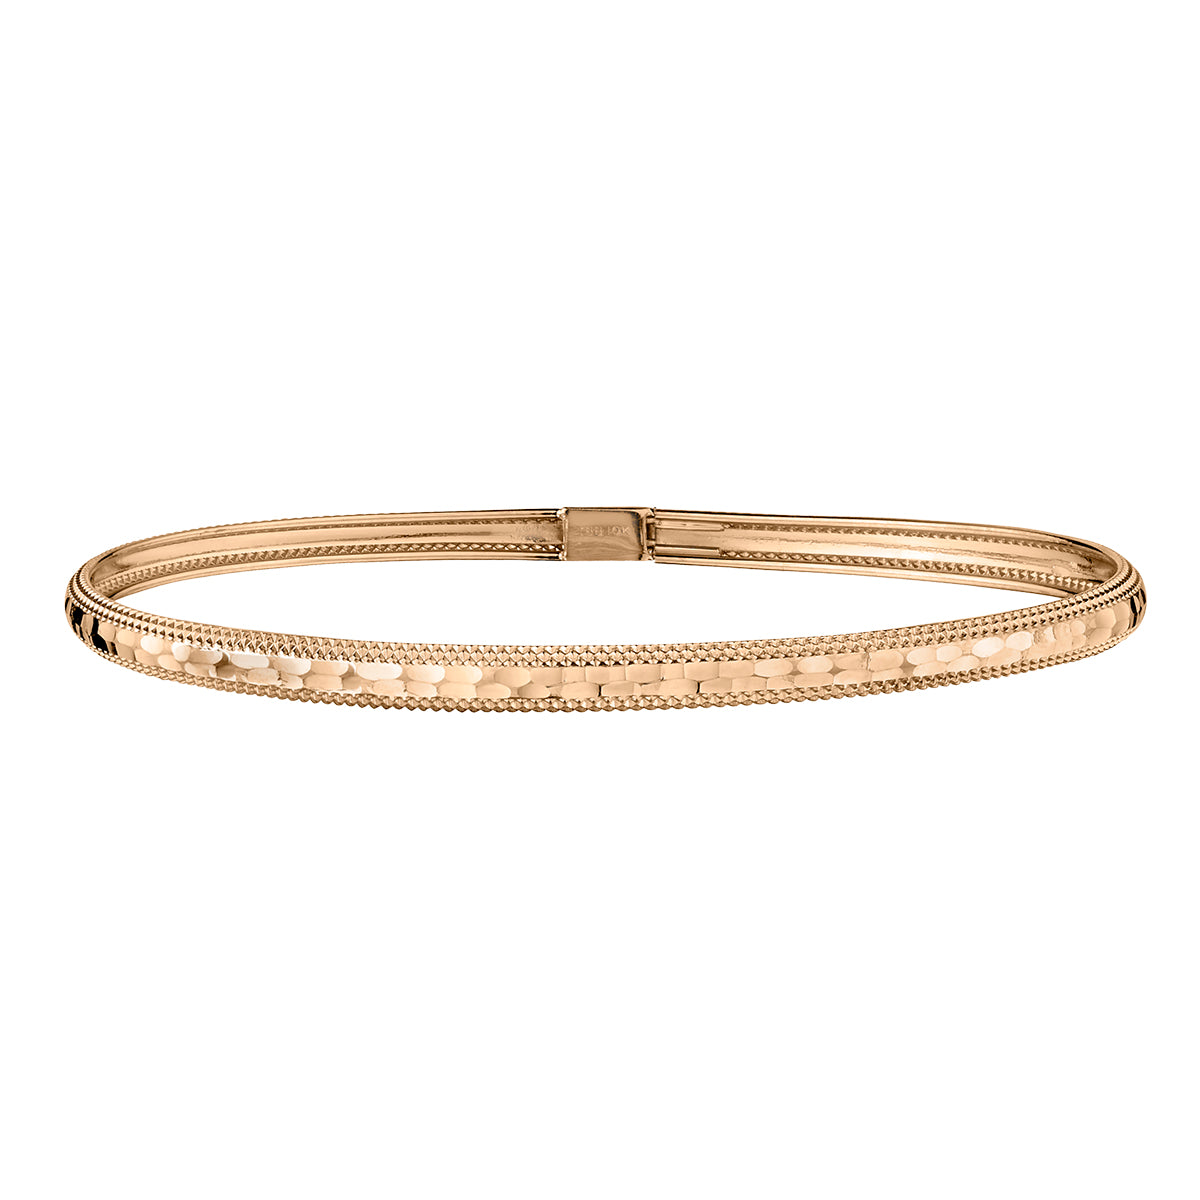 10kt Yellow Gold Bangle.......................NOW